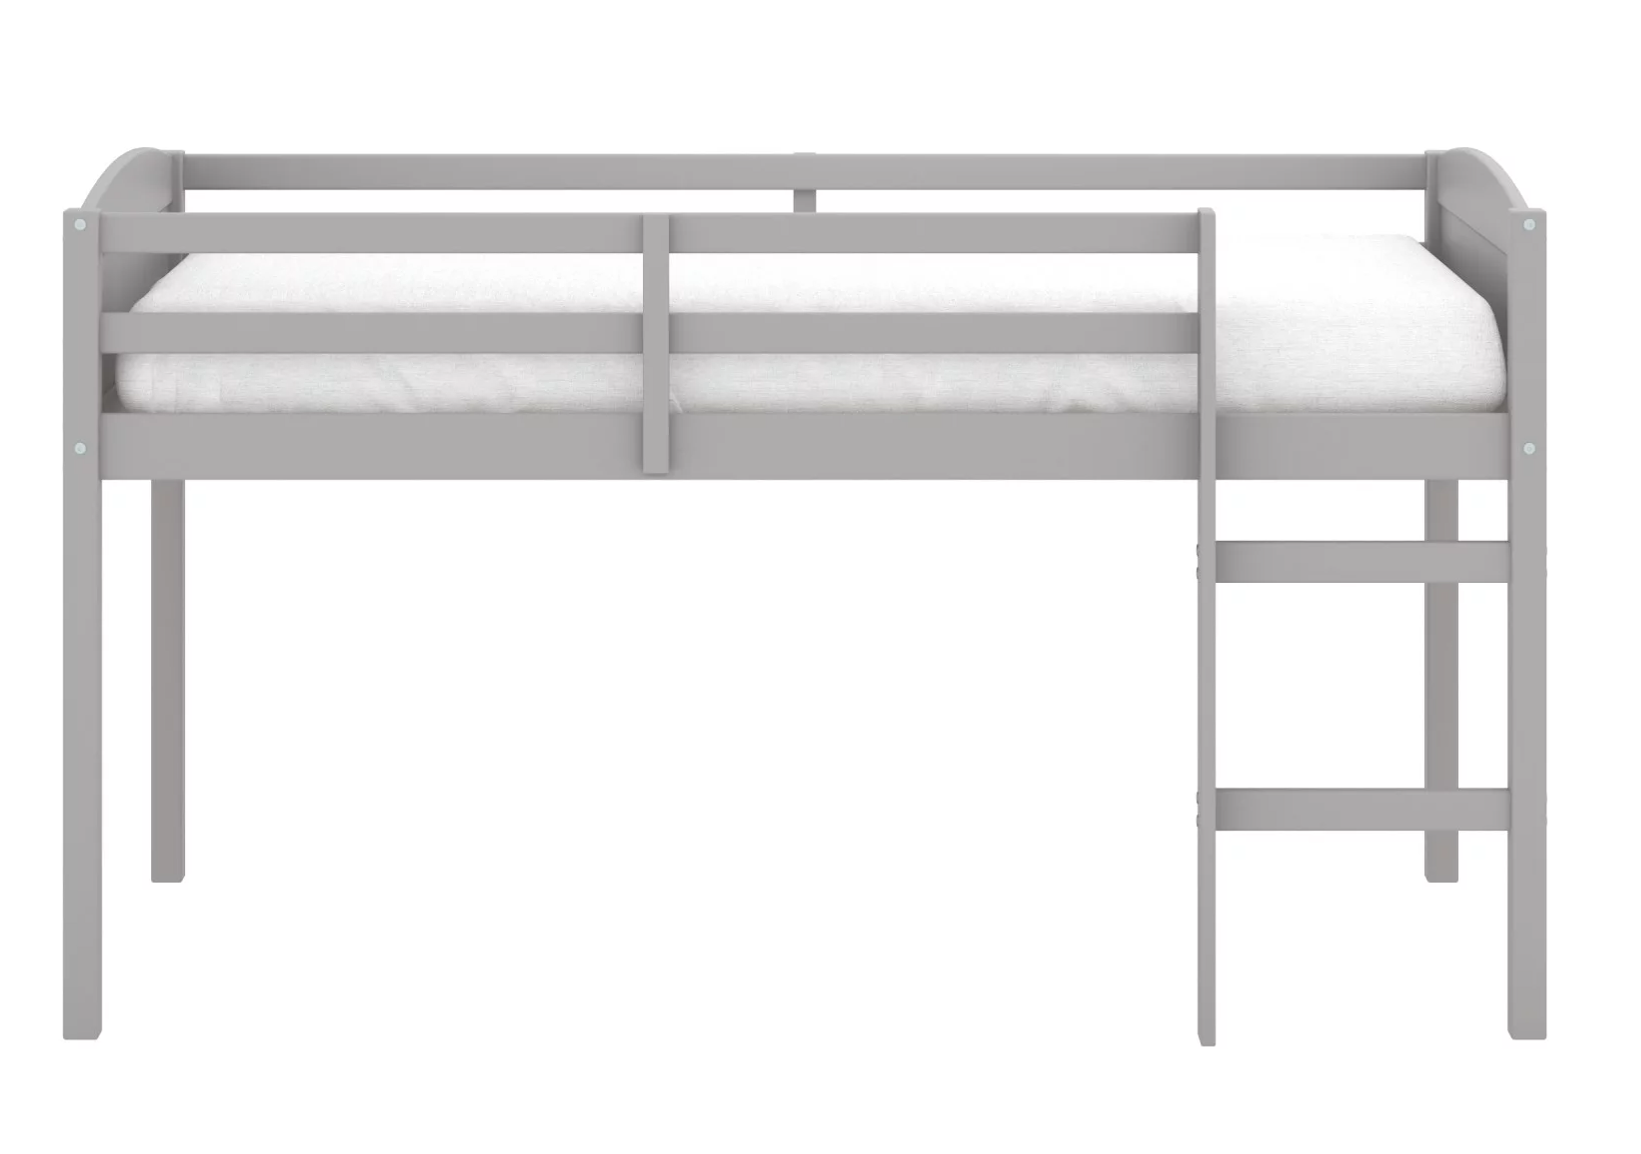 Living Essentials by Hillsdale Alexis Wood Arch Twin Jr. Loft Bed, Gray $115 Walmart